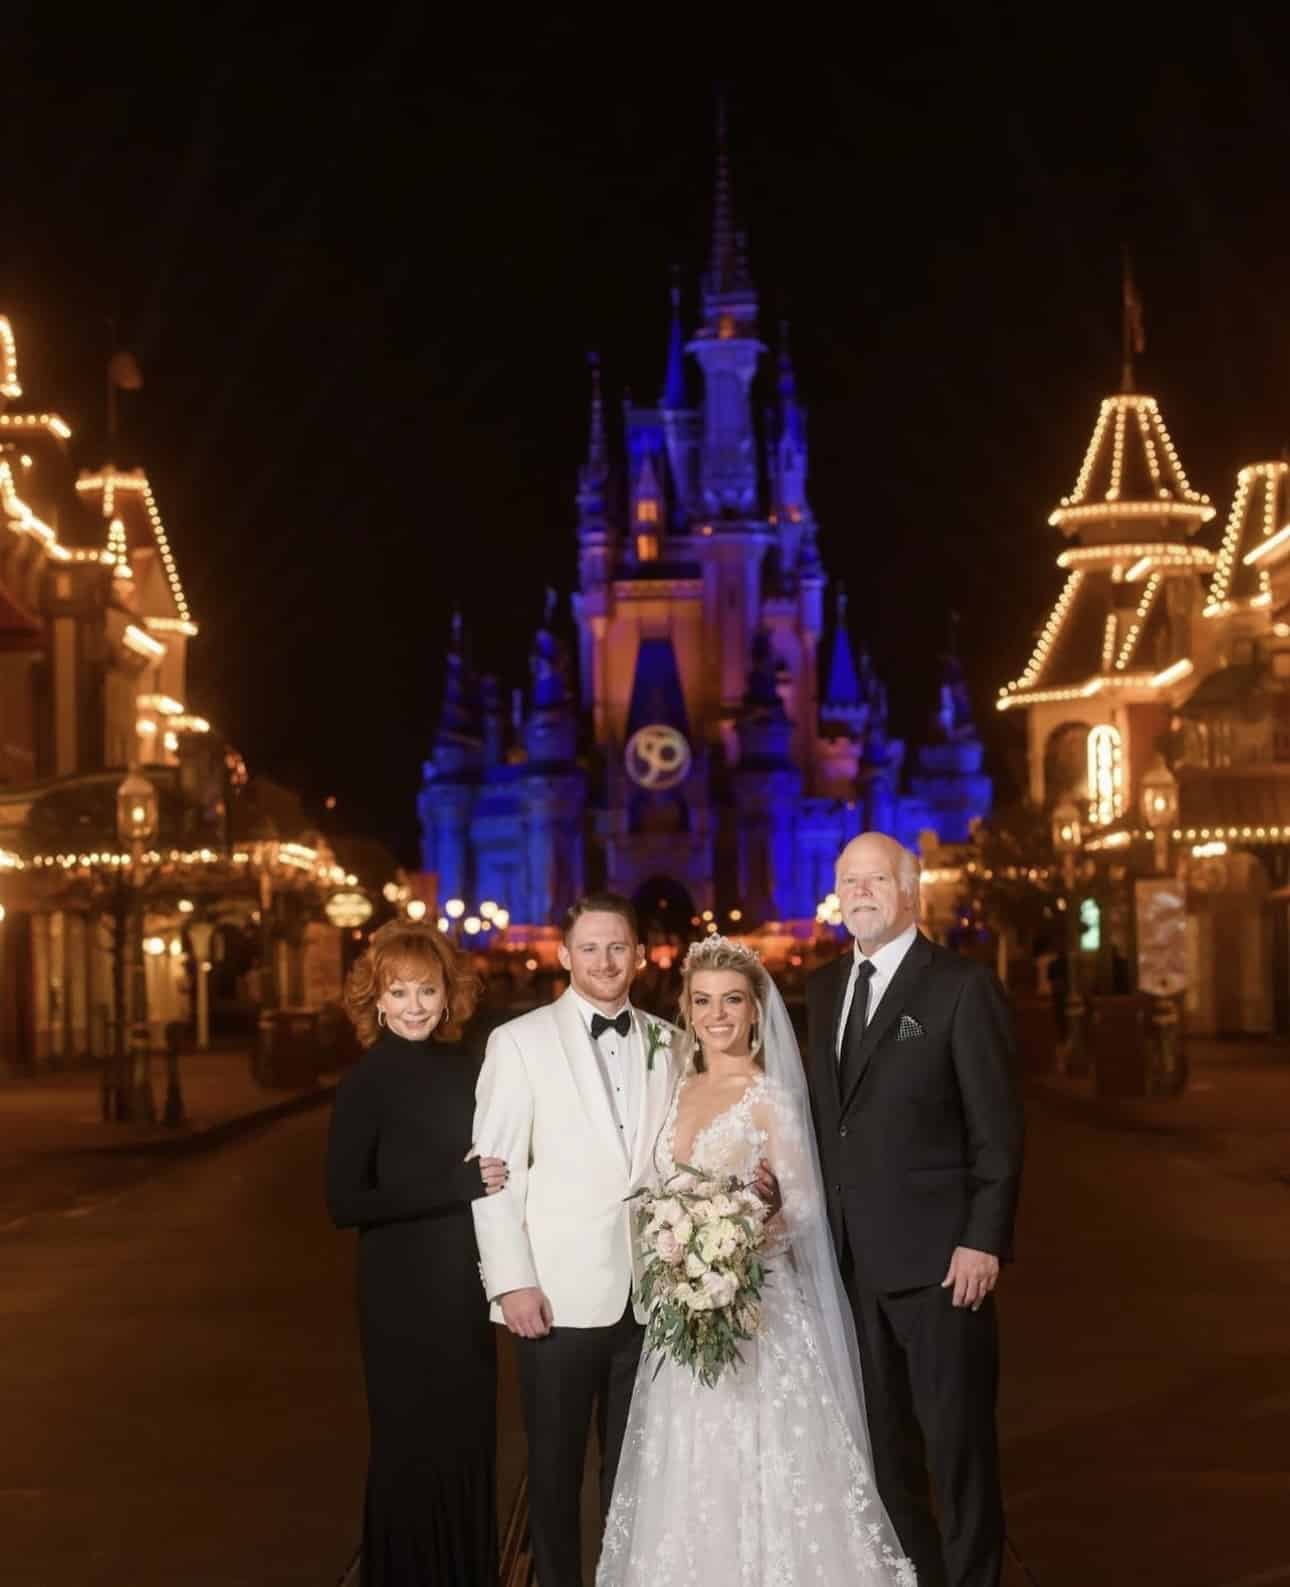 Shelby Blackstock, Reba's son, and wife Marissa share wedding picture at Disney's Epcot.